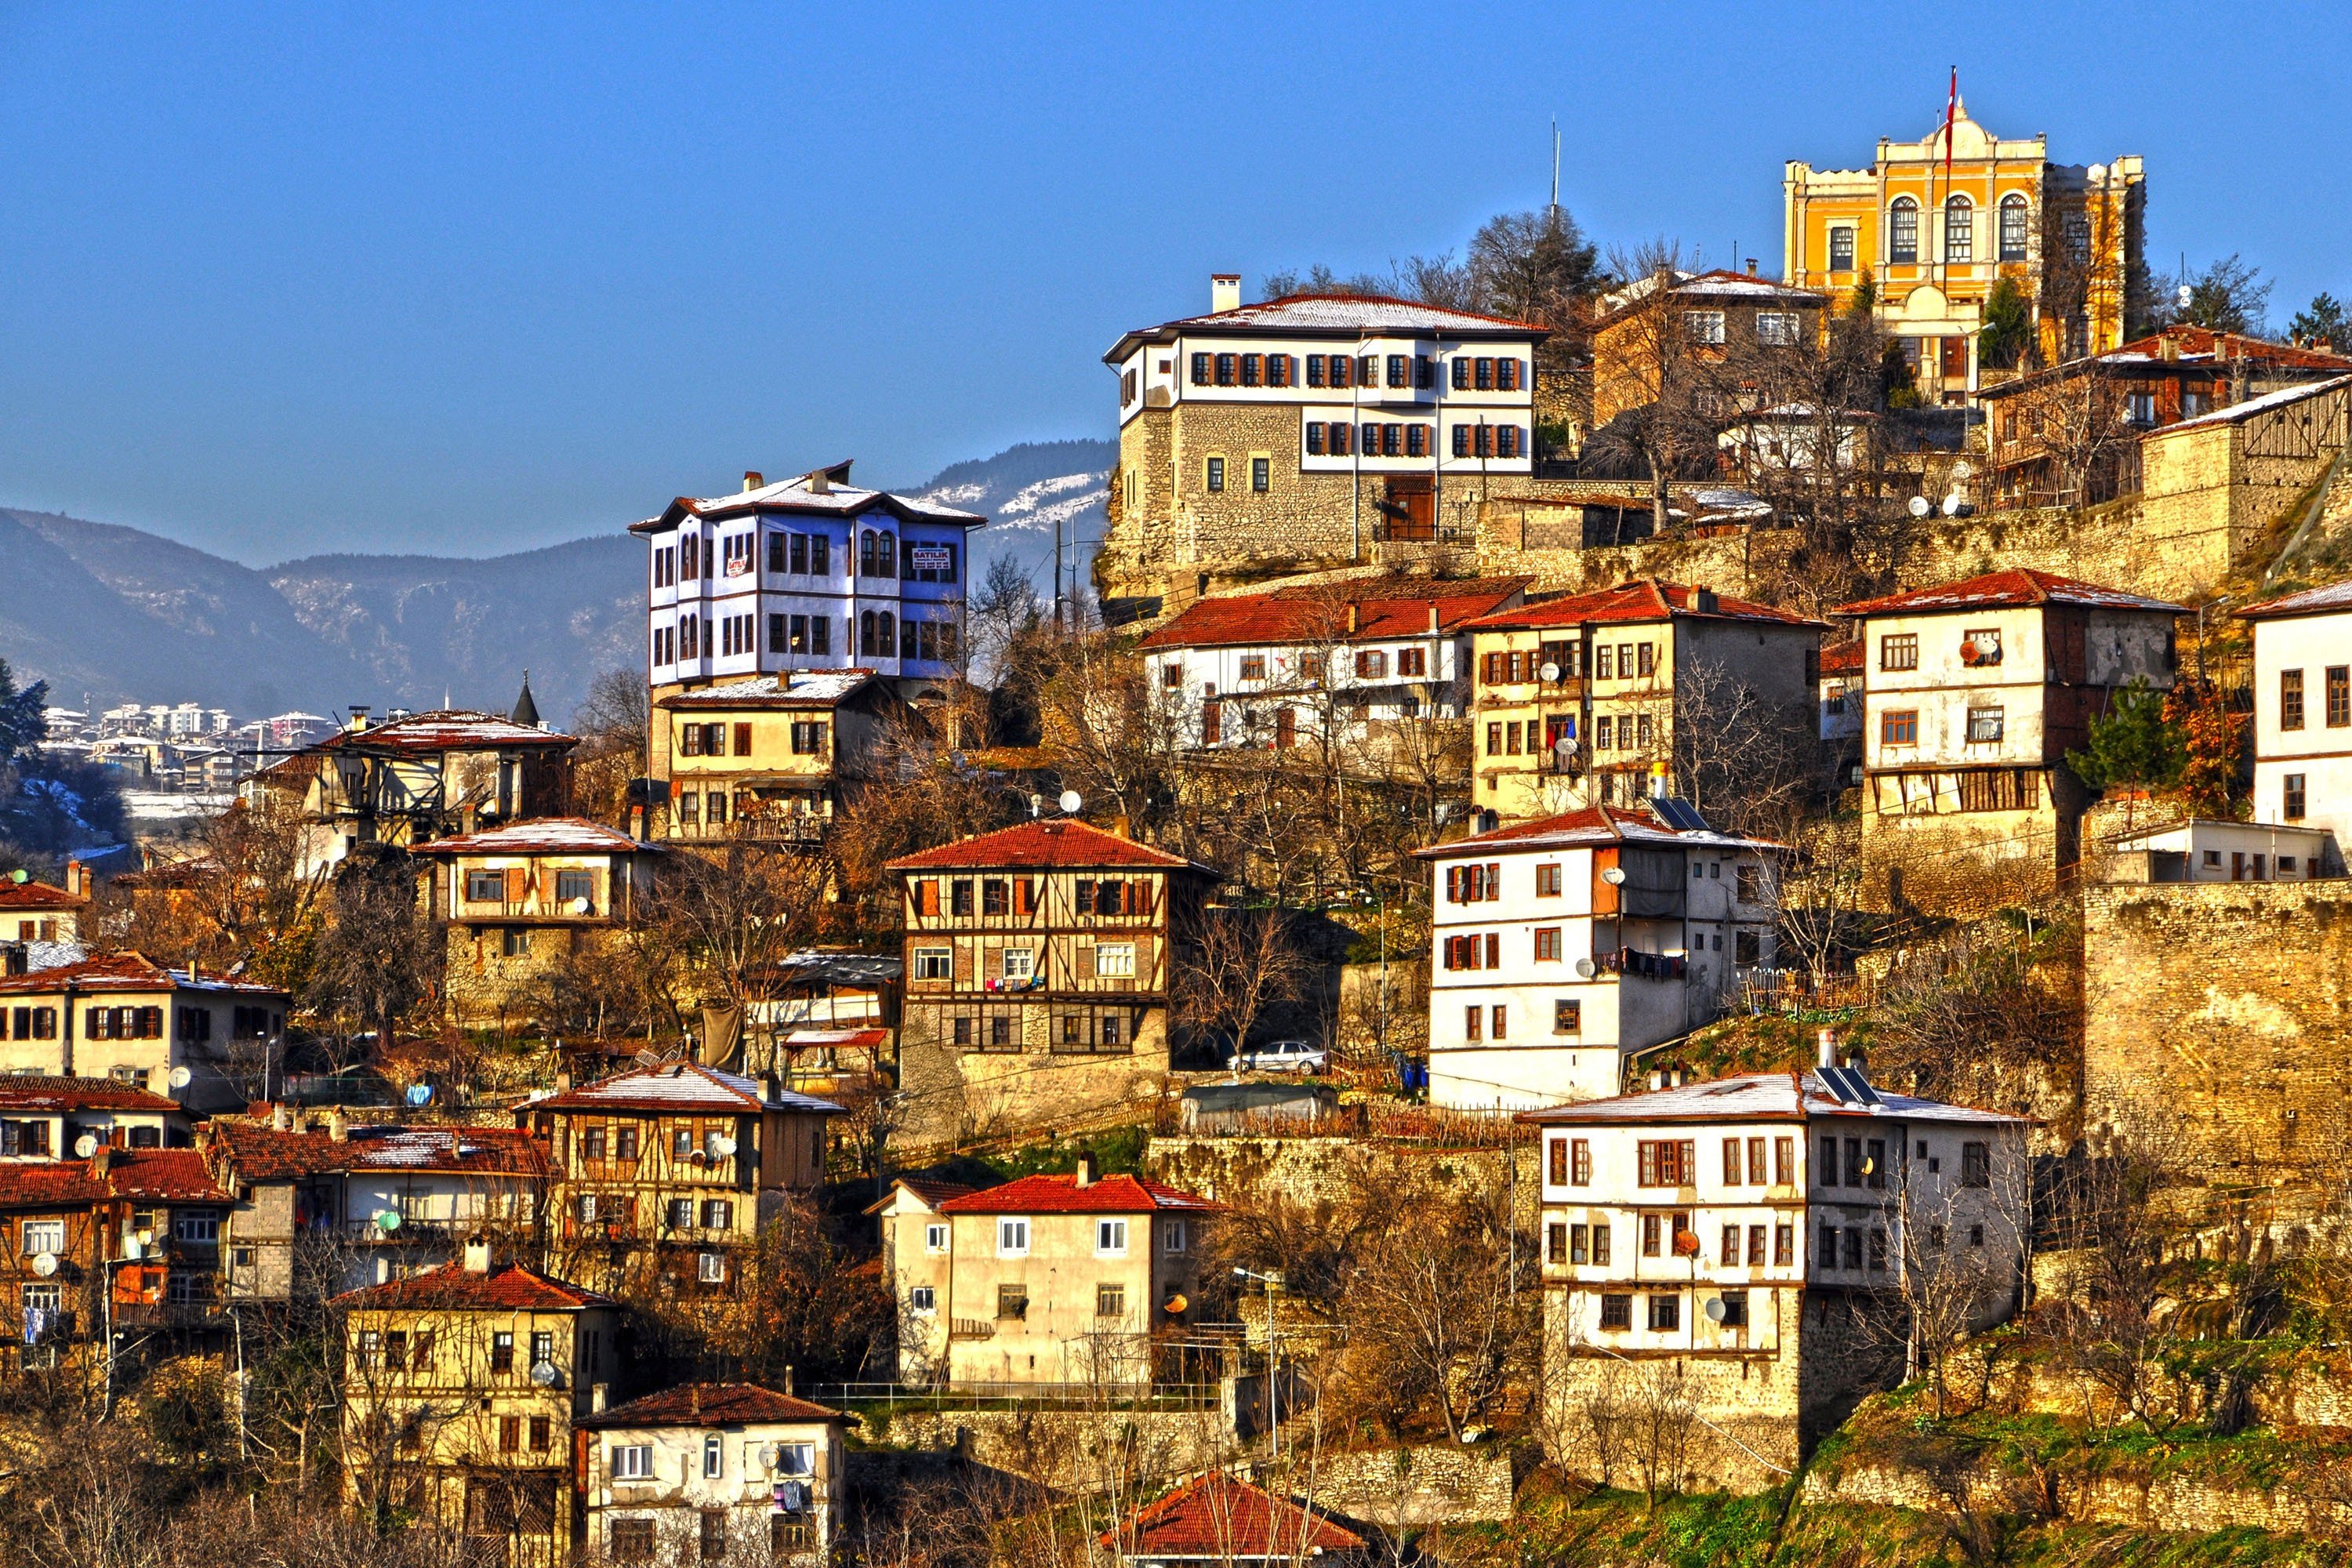 The Stunning view of Ottoman Houses during daytime